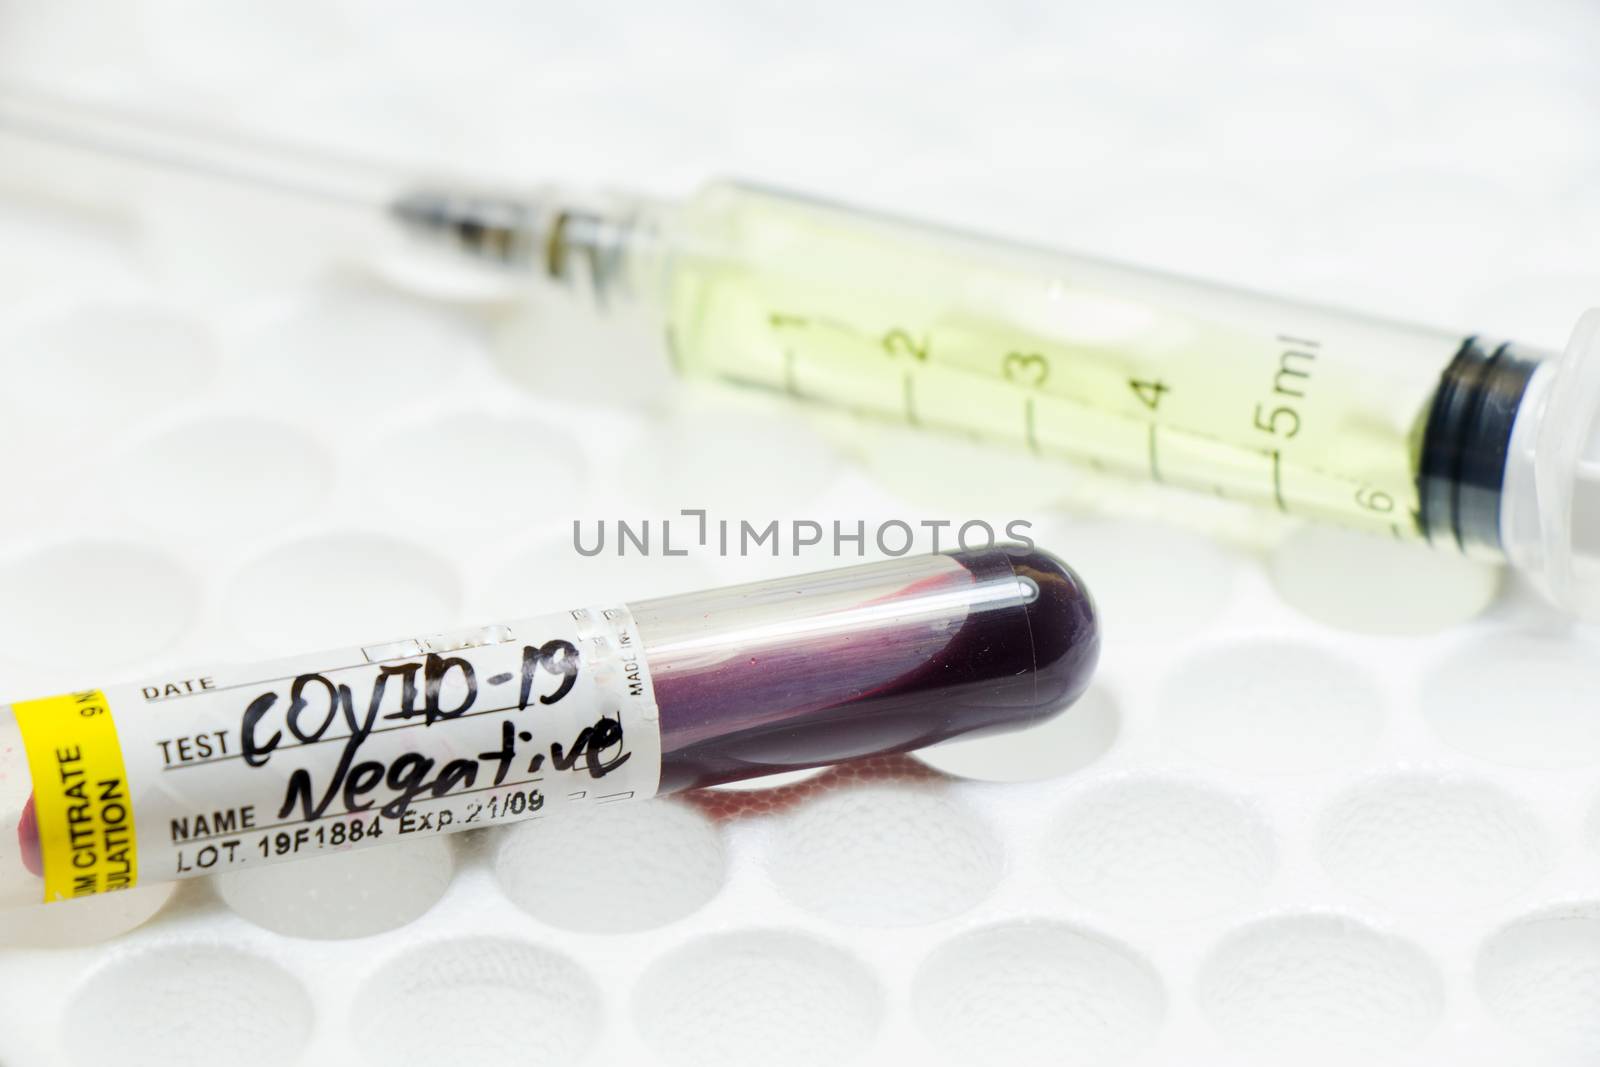 Medical needle and blood tube, corona virus or covid-19 vaccine. Close-up and studio shoot.